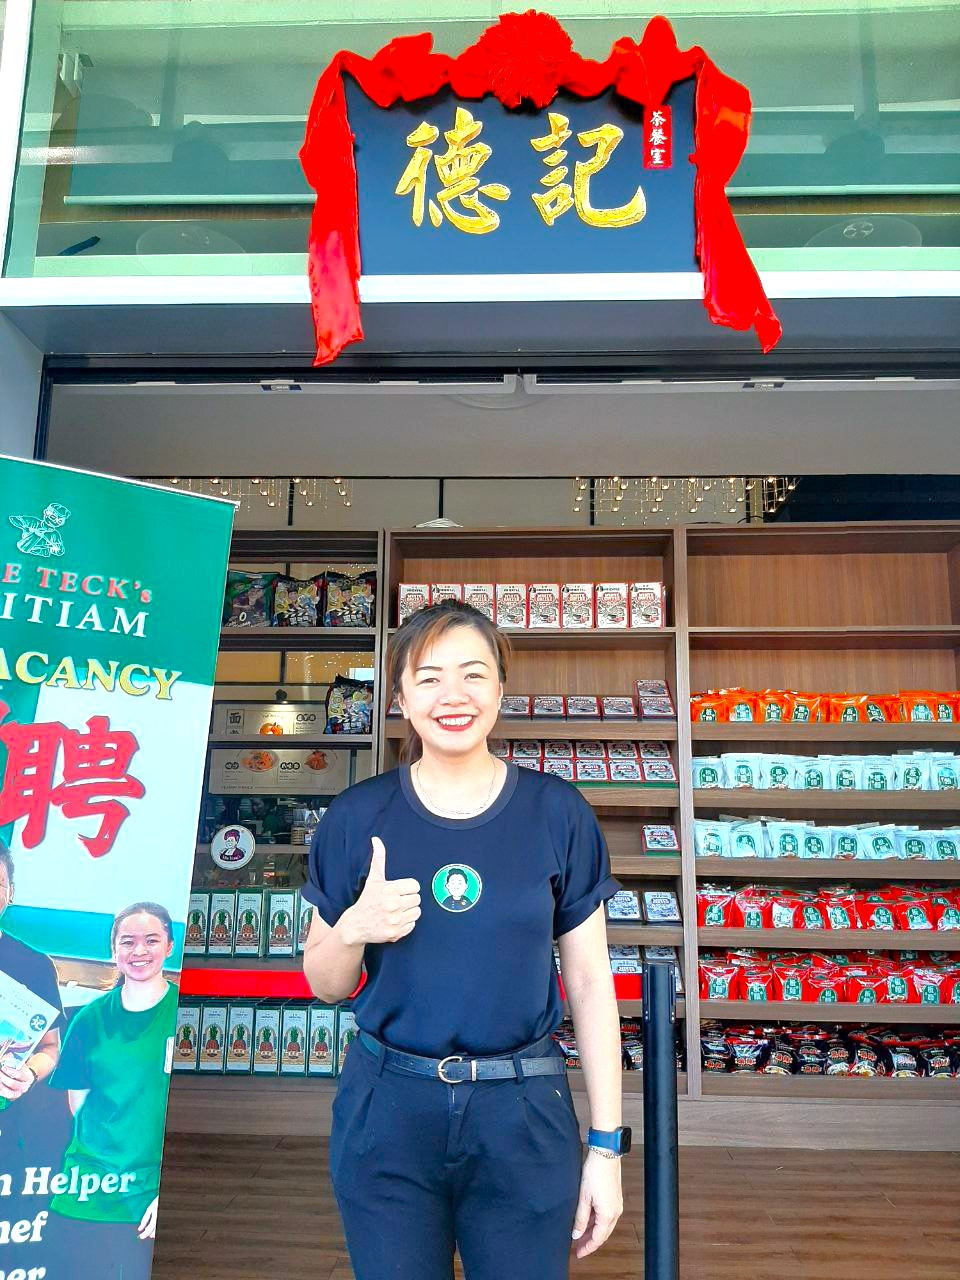 Third-generation daughter-in-law of Uncle Teck founder, and floor manager Desiree Tan gives the thumbs up. She manages the day-to-day operations of the eatery and trains her waiting staff to be meticulous and attentive all the time. – Marilyn Madrod pic